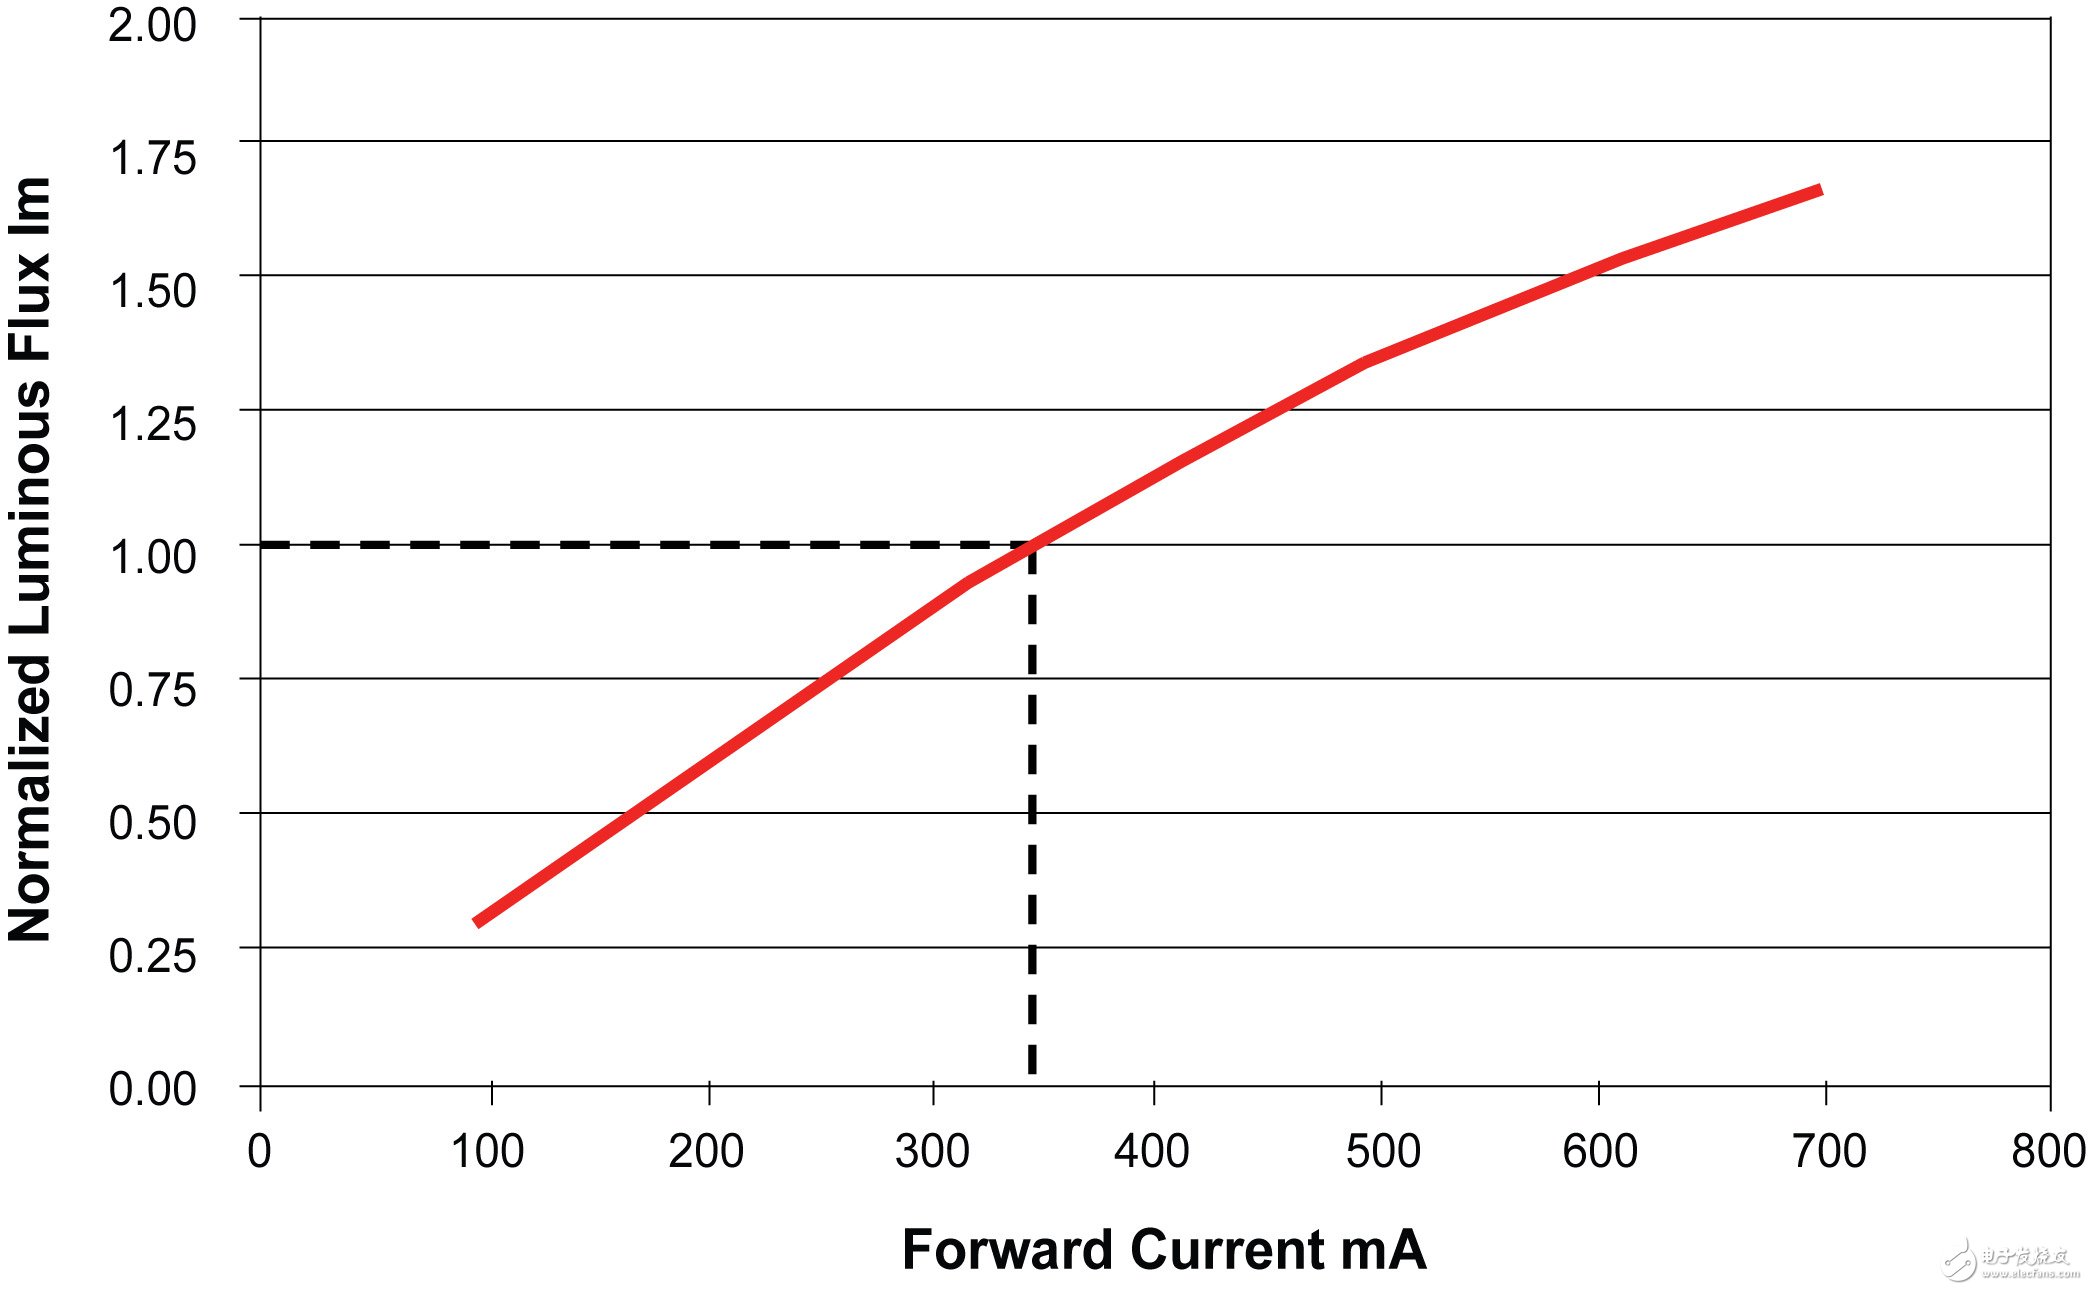 Figure 1: Luminous flux is proportional to forward current